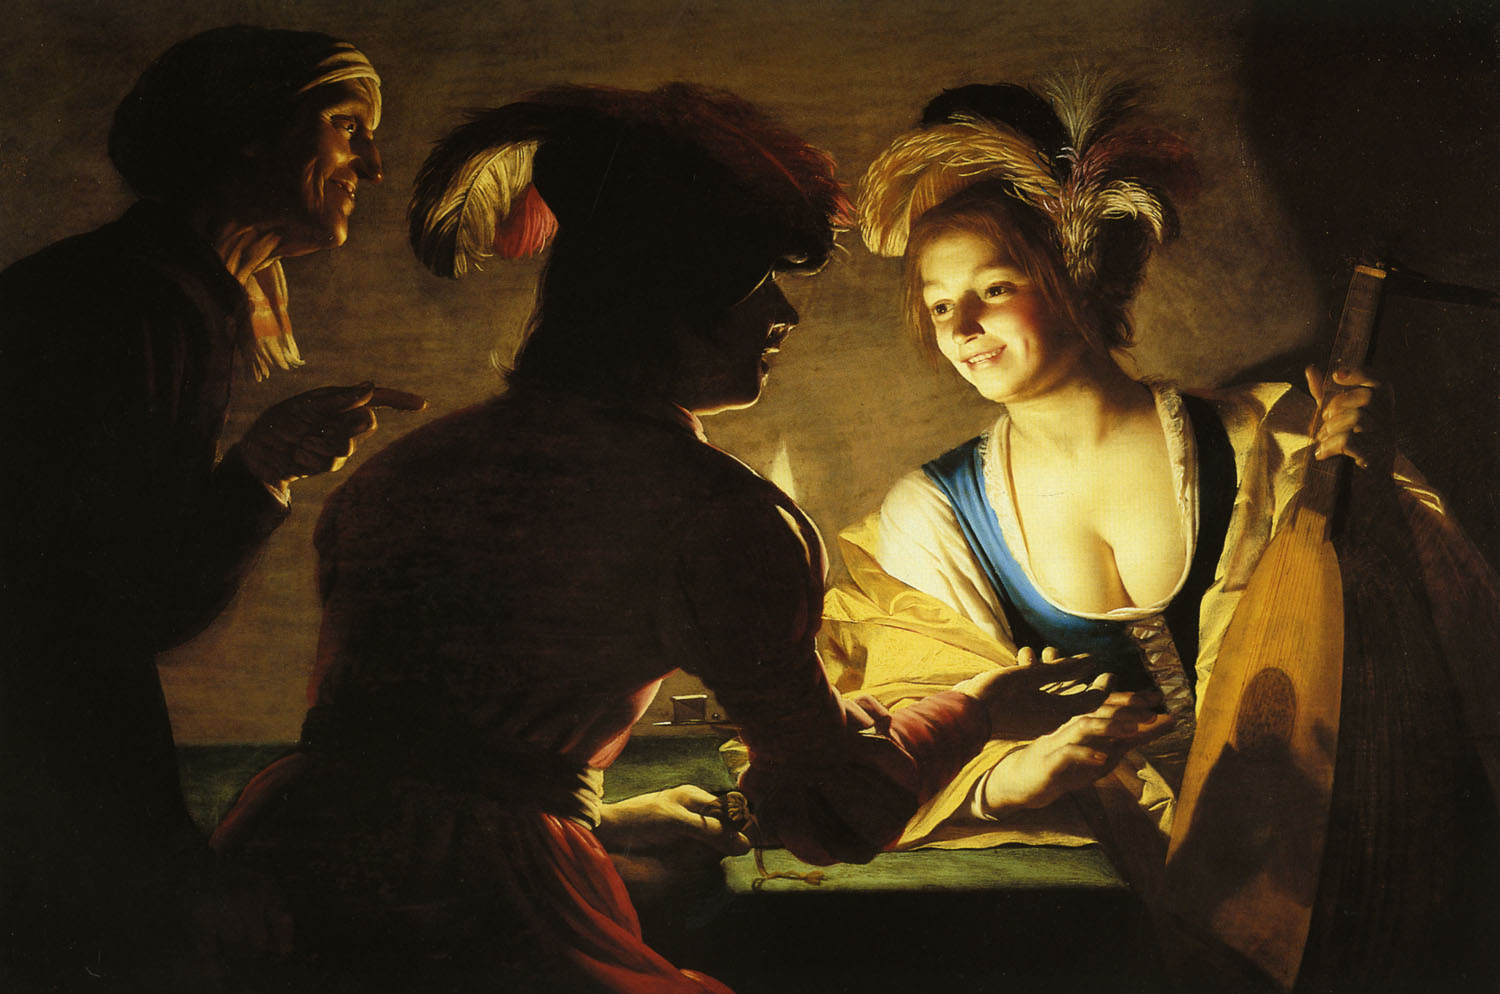 The Whore, the Bawd, and the Artist The Reality and Imagery of Seventeenth-Century Dutch Prostitution